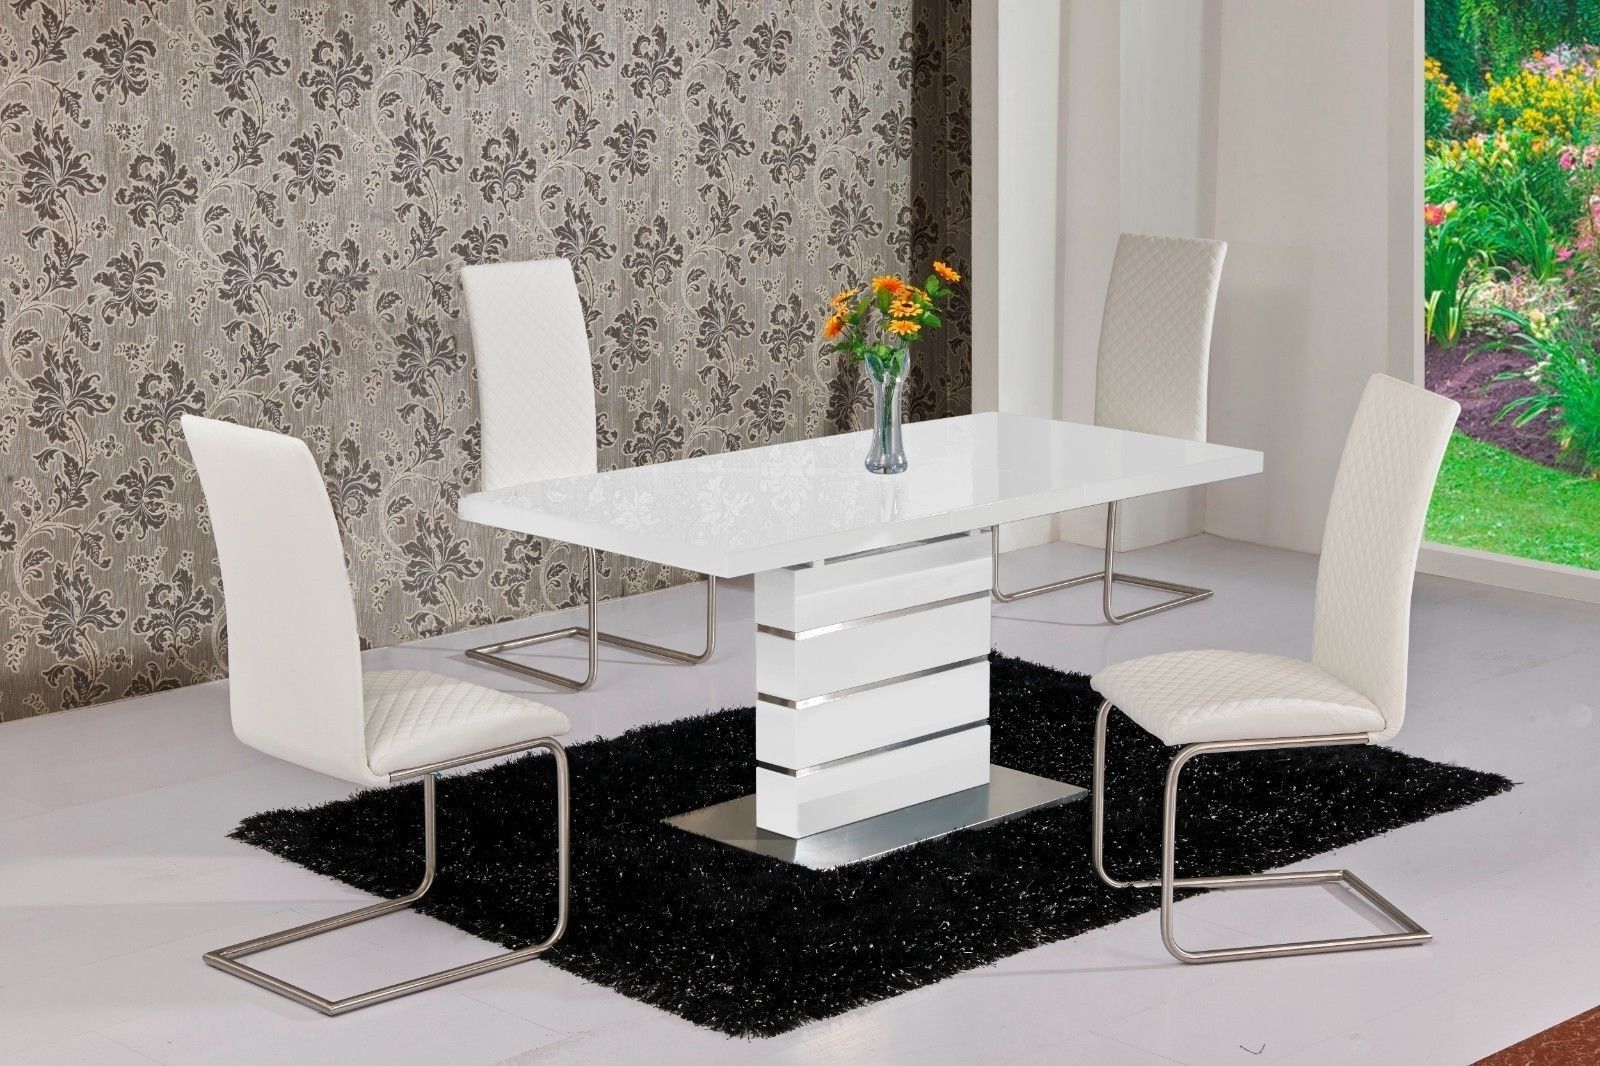 Mace High Gloss Extending 120 160 Dining Table & Chair Set – White Within Popular White Gloss Dining Tables (View 9 of 25)